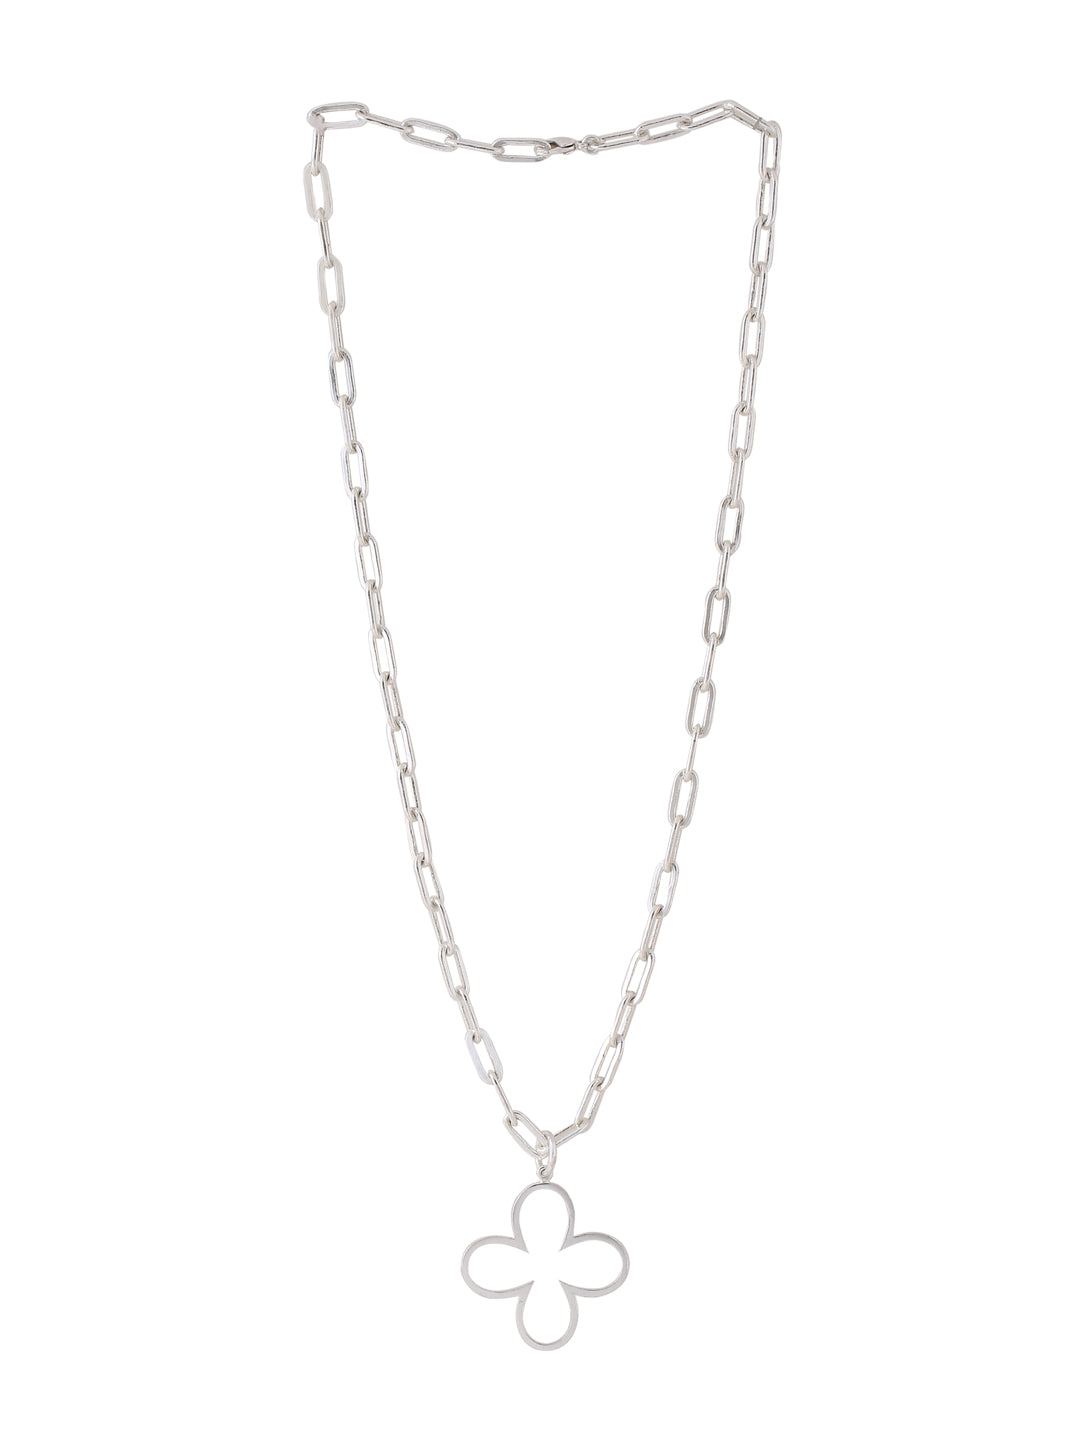 Bud Necklace - Silver